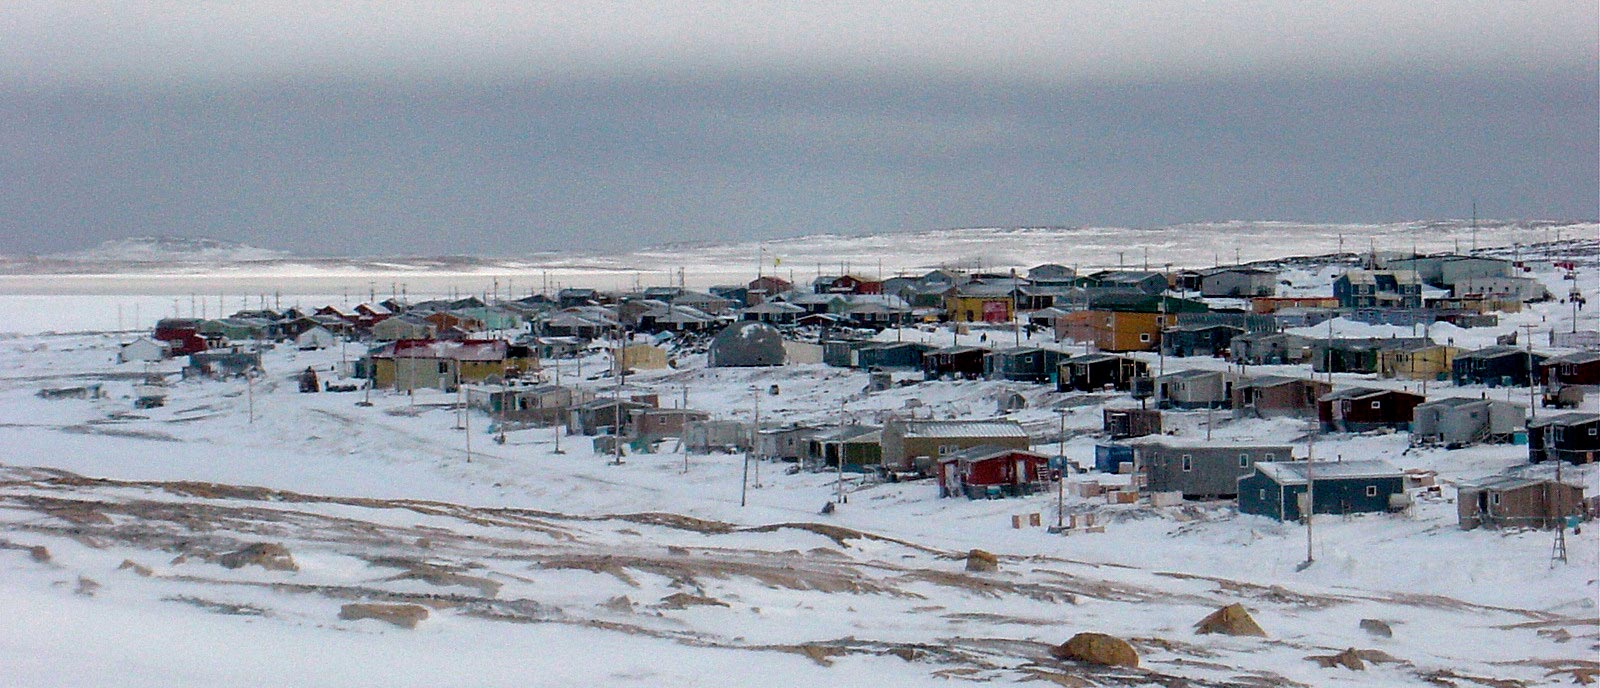 Sanikiluaq, a small community in Nunavut. Photograph taken during winter with windswept and exposed tundra in the foreground.